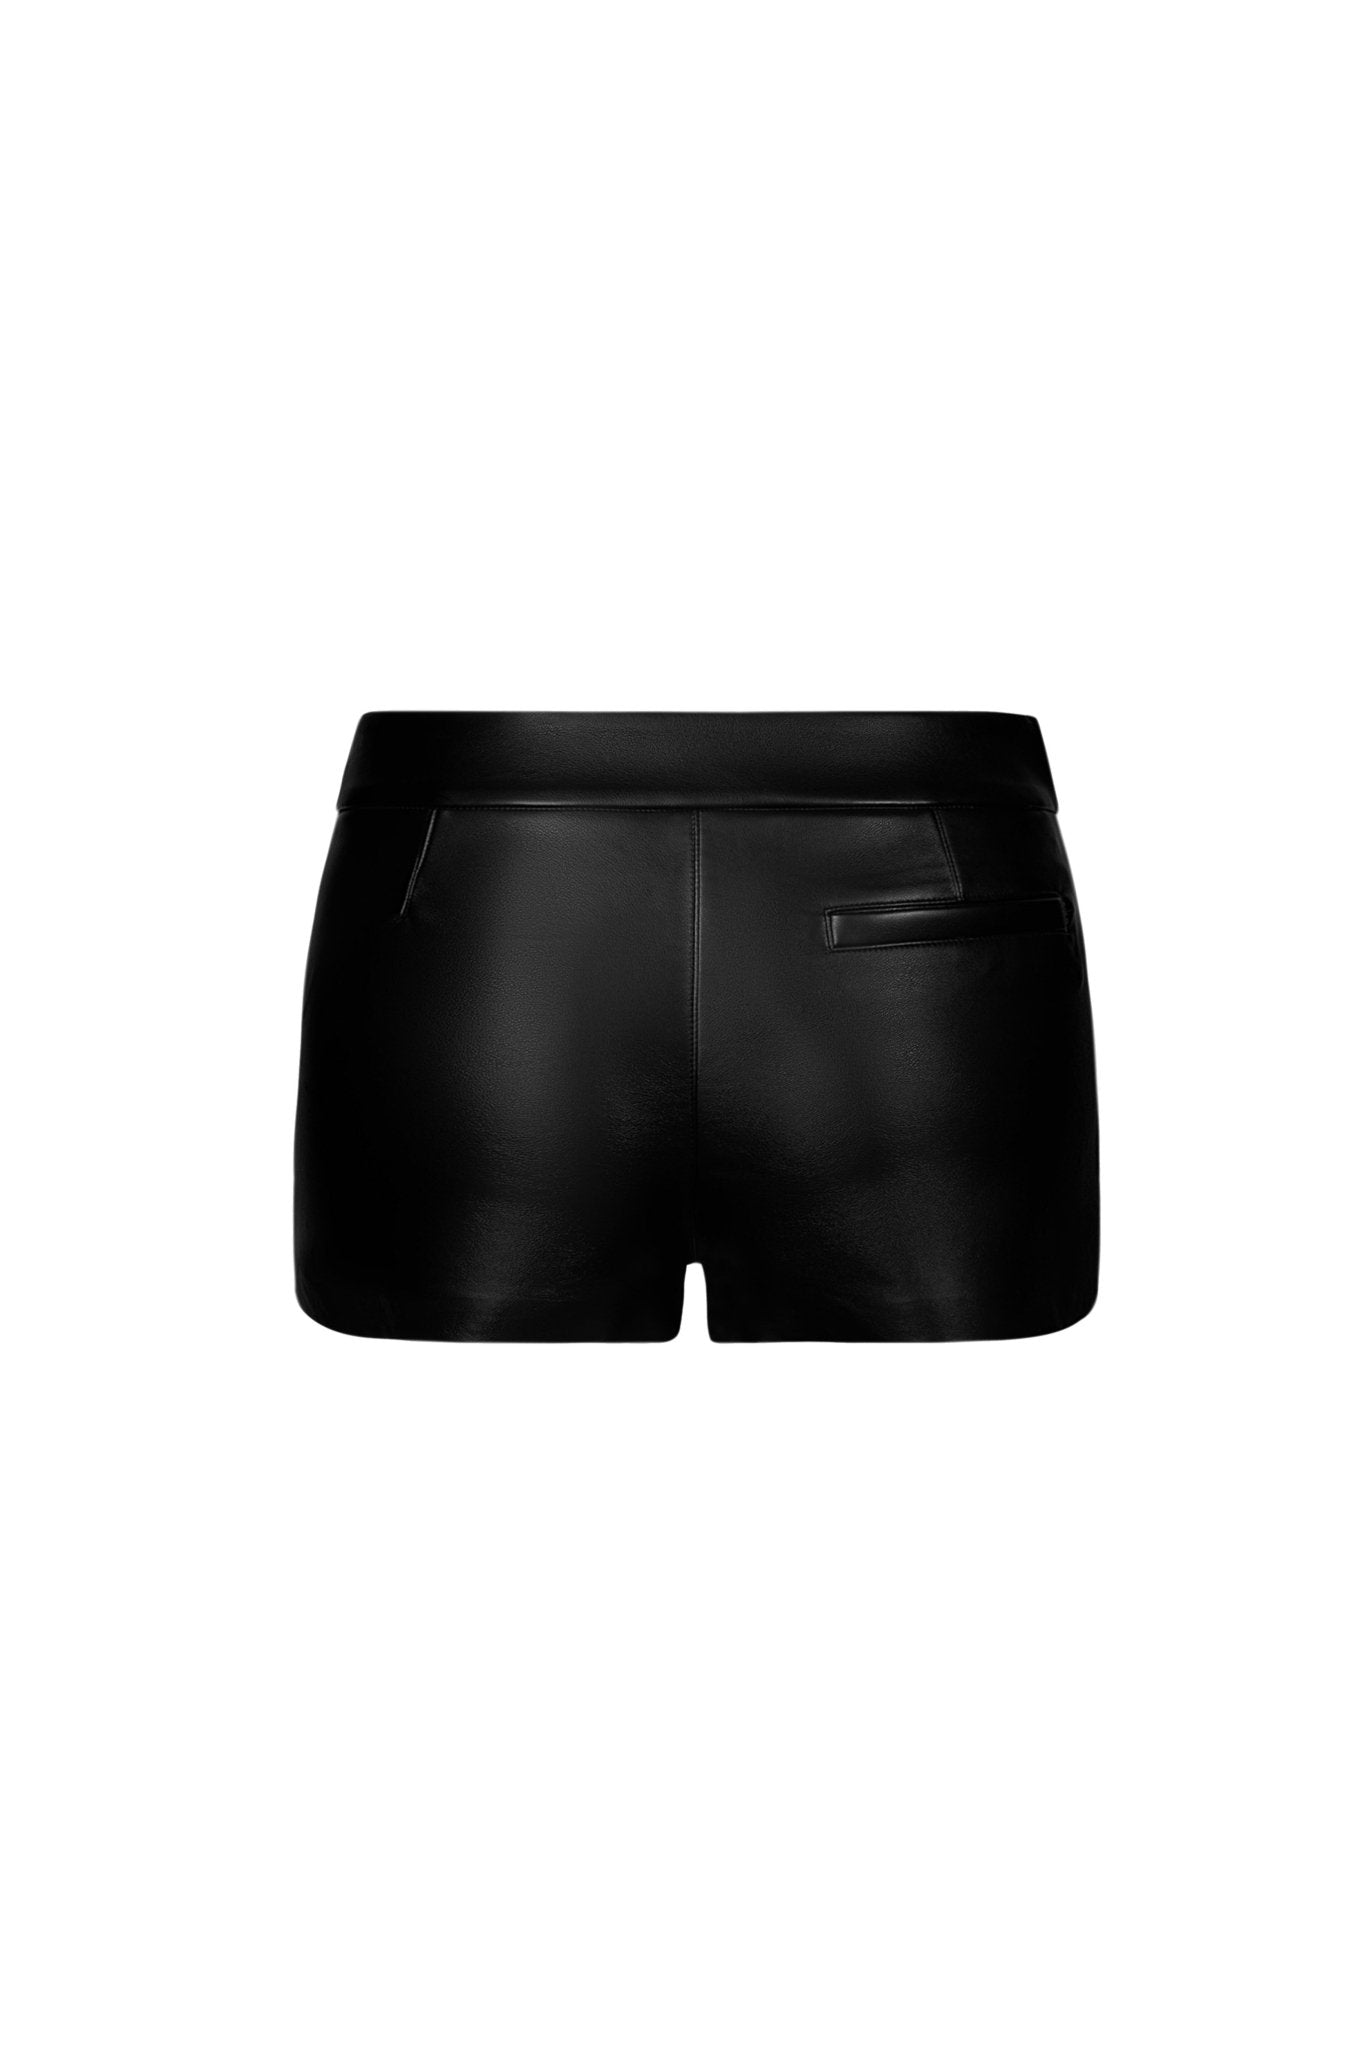 ANN ANDELMAN Black Faux Leather Fitting Skort | MADA IN CHINA